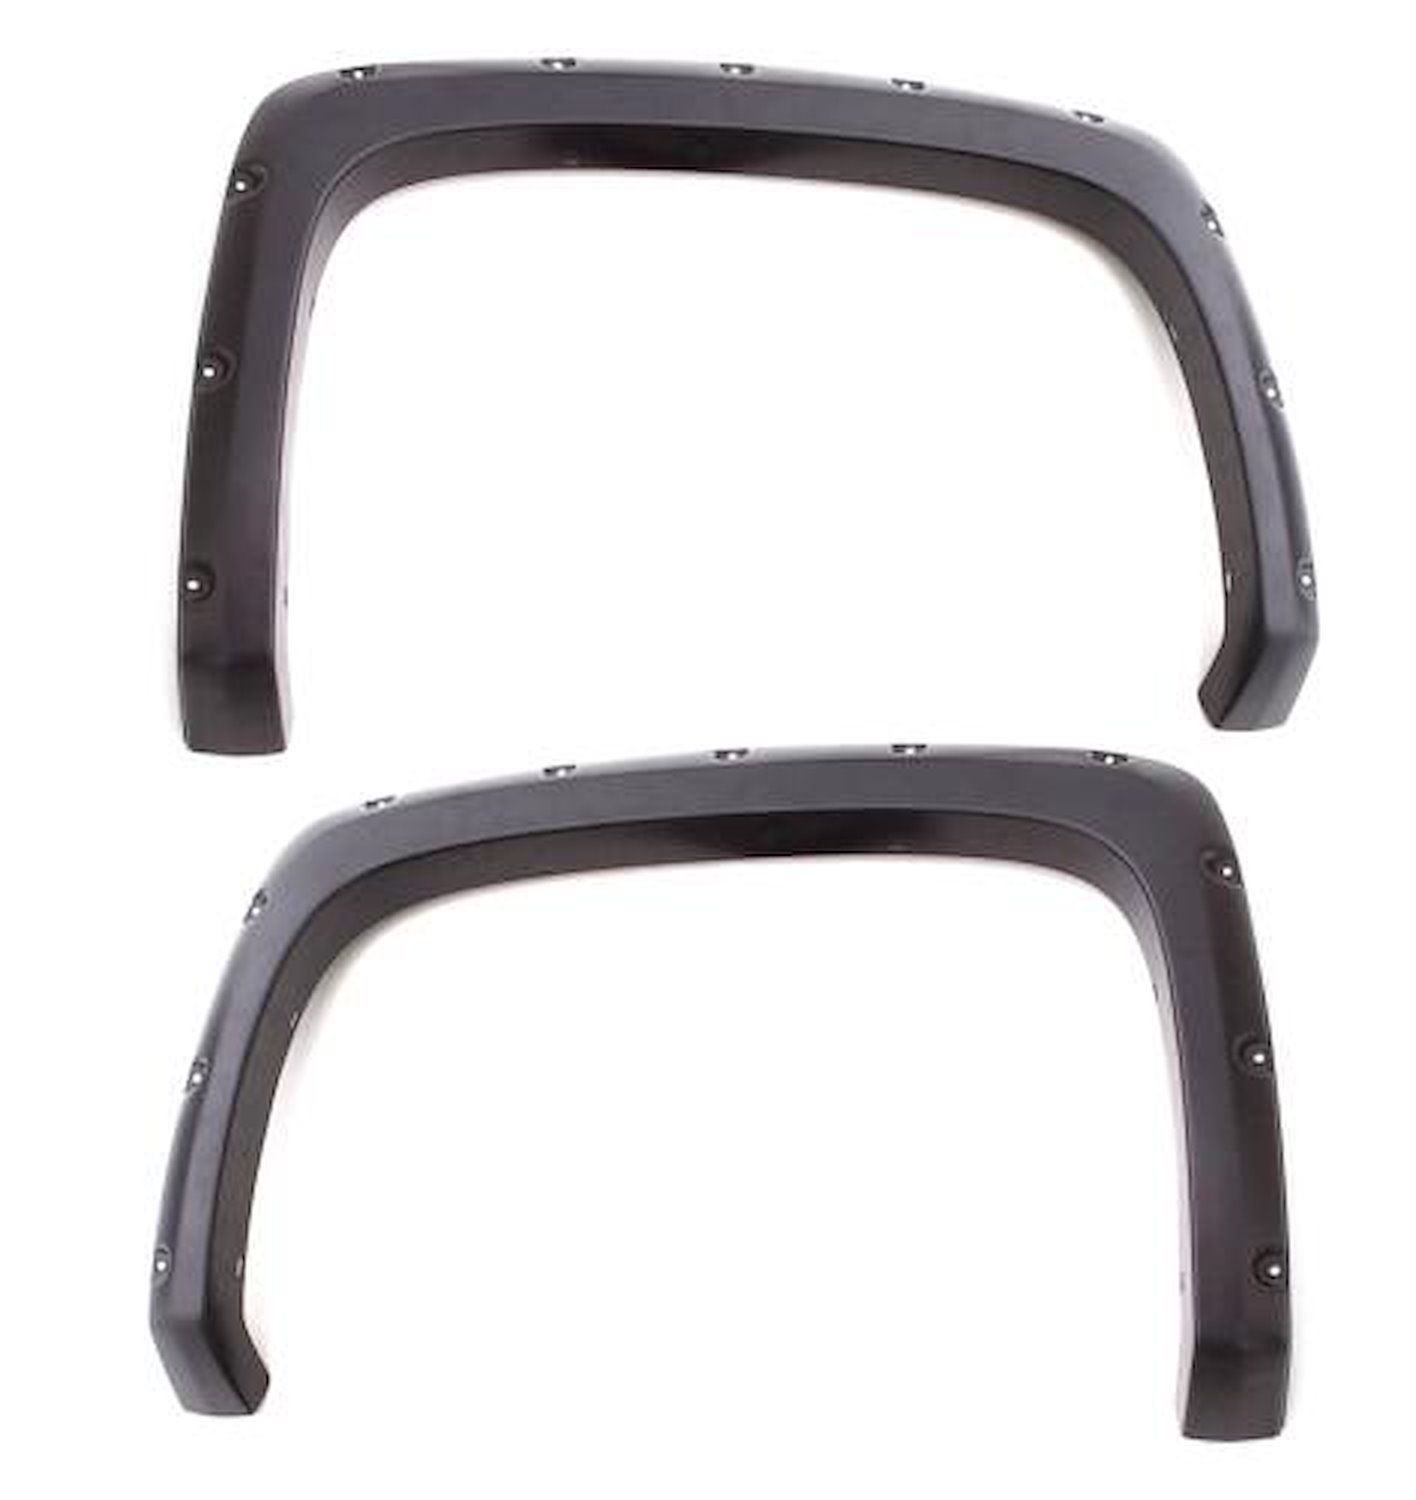 RX Rivet-Style Rear Fender Flares For Select Late-Model GMC Sierra 1500 Trucks [Smooth Finish]